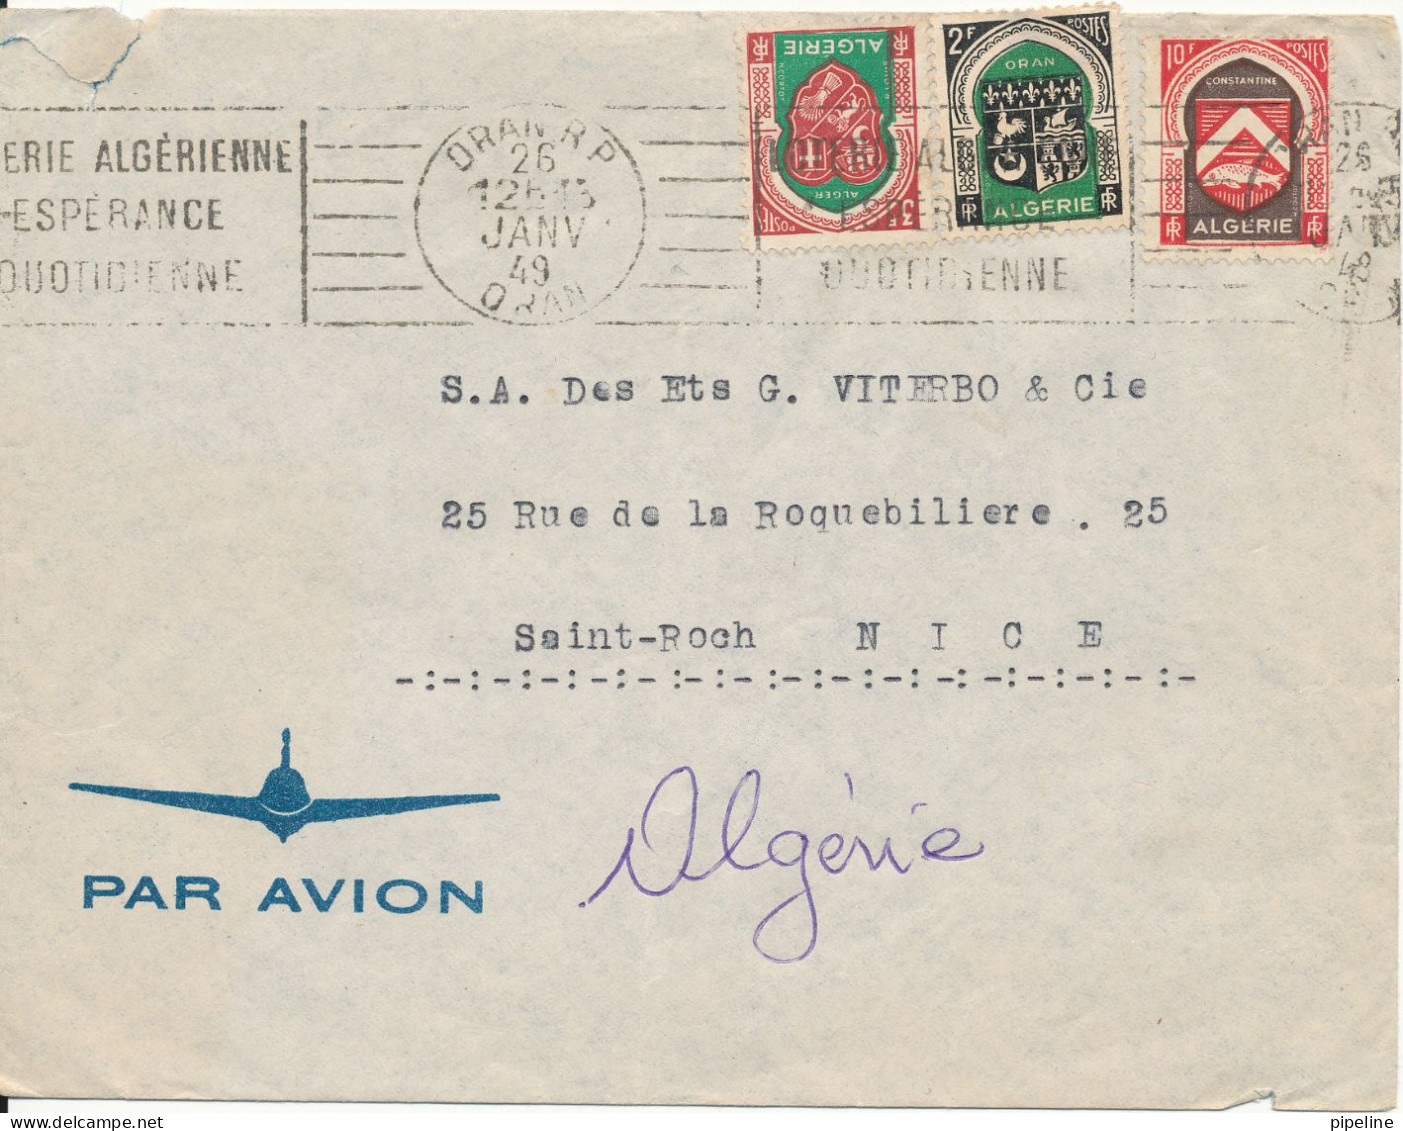 Algeria Air Mail Cover Sent To France 26-1-1949 - Luftpost